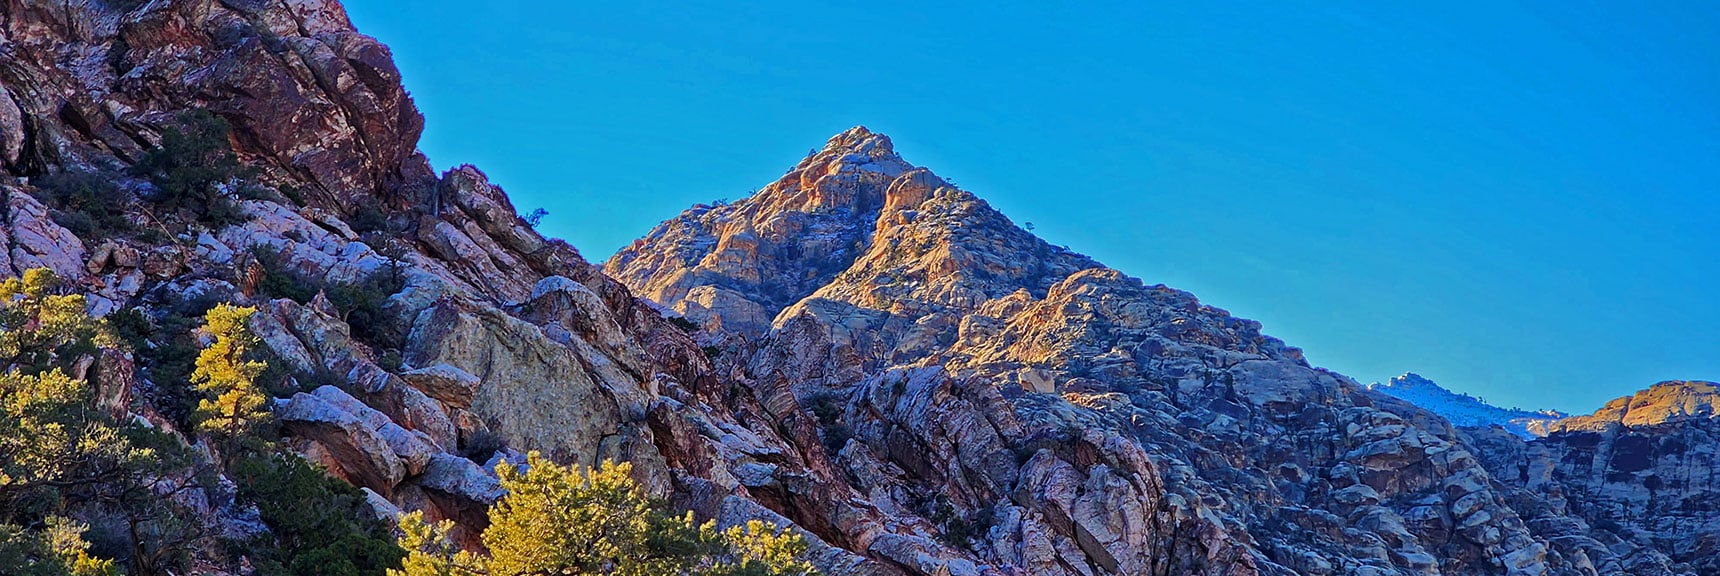 White Rock Mountain Summit Touched by First Light | White Rock Mountain Loop Trail | Red Rock Canyon, Nevada